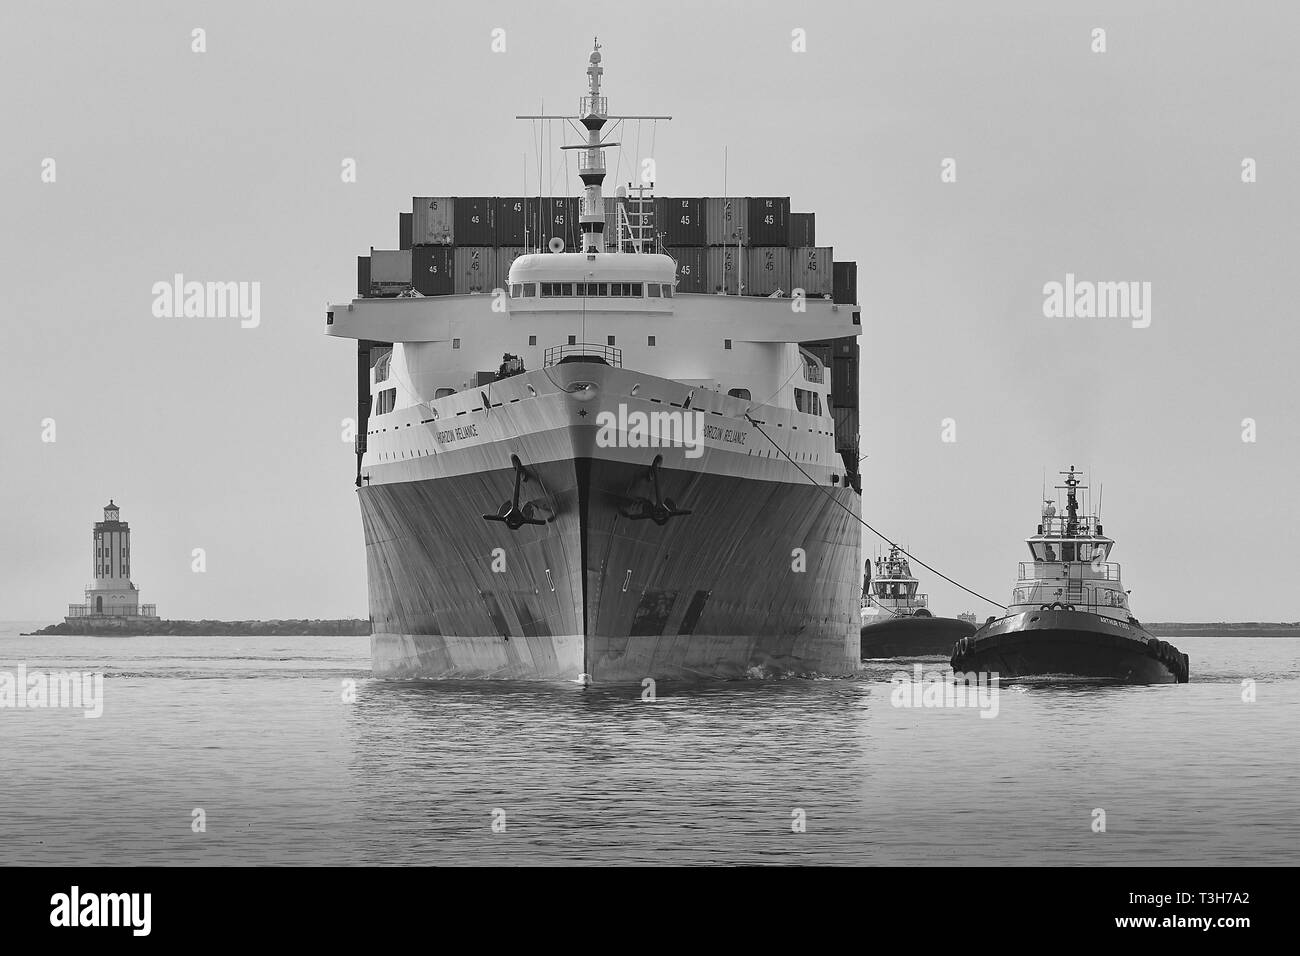 Black And White Photo Of The PASHA HAWAII, Container Ship, HORIZON RELIANCE, Enters The Los Angeles Main Channel At The Angels Gate Lighthouse Stock Photo